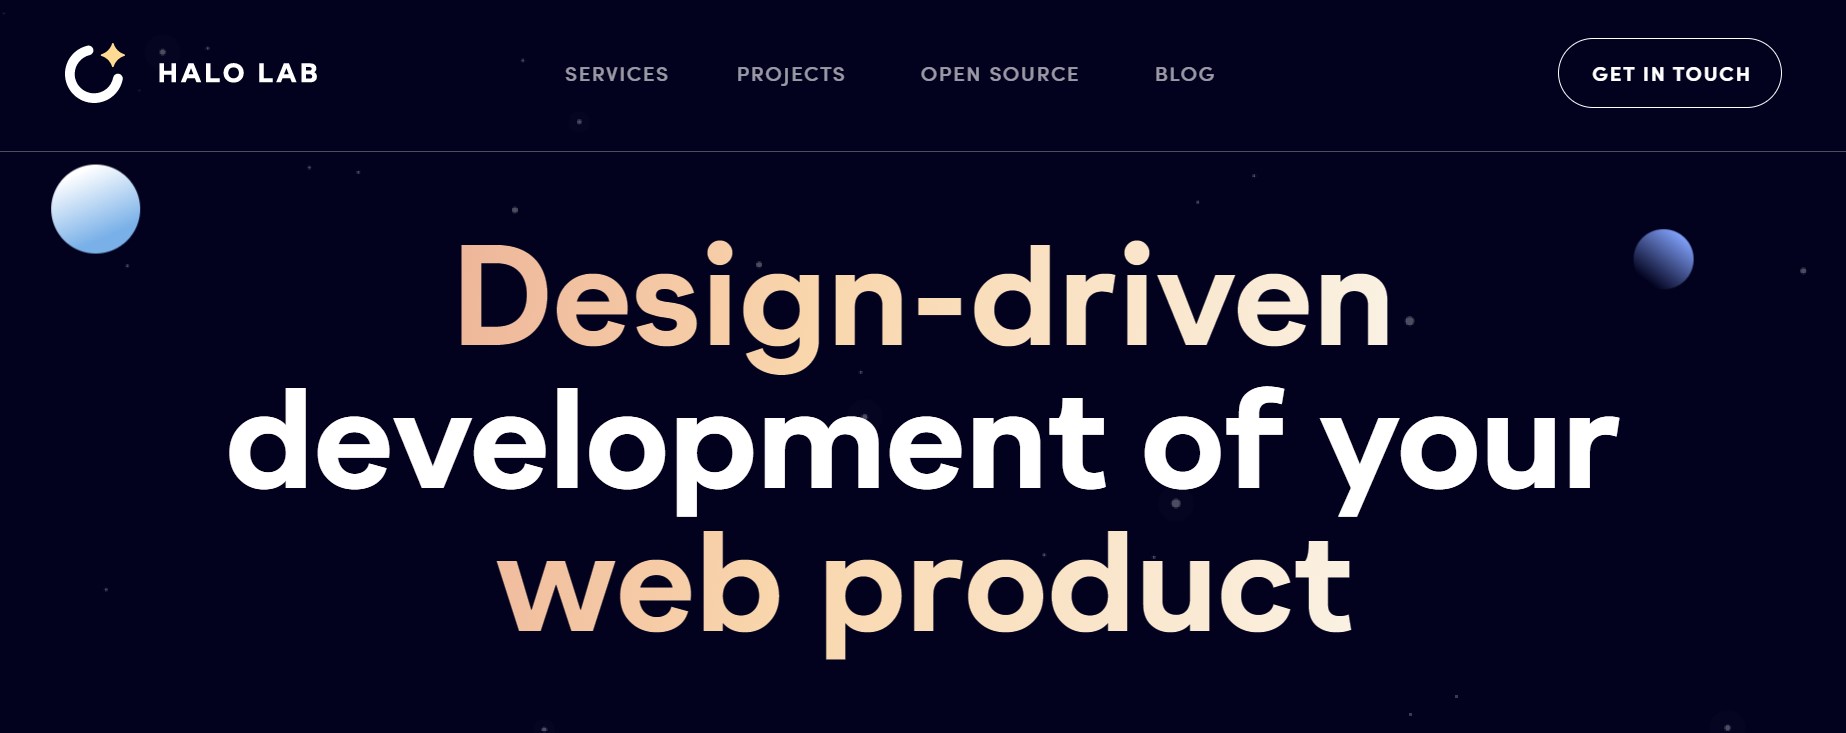 Halo Lab software development company hero image with slogan that reads: design-driven development of your web product